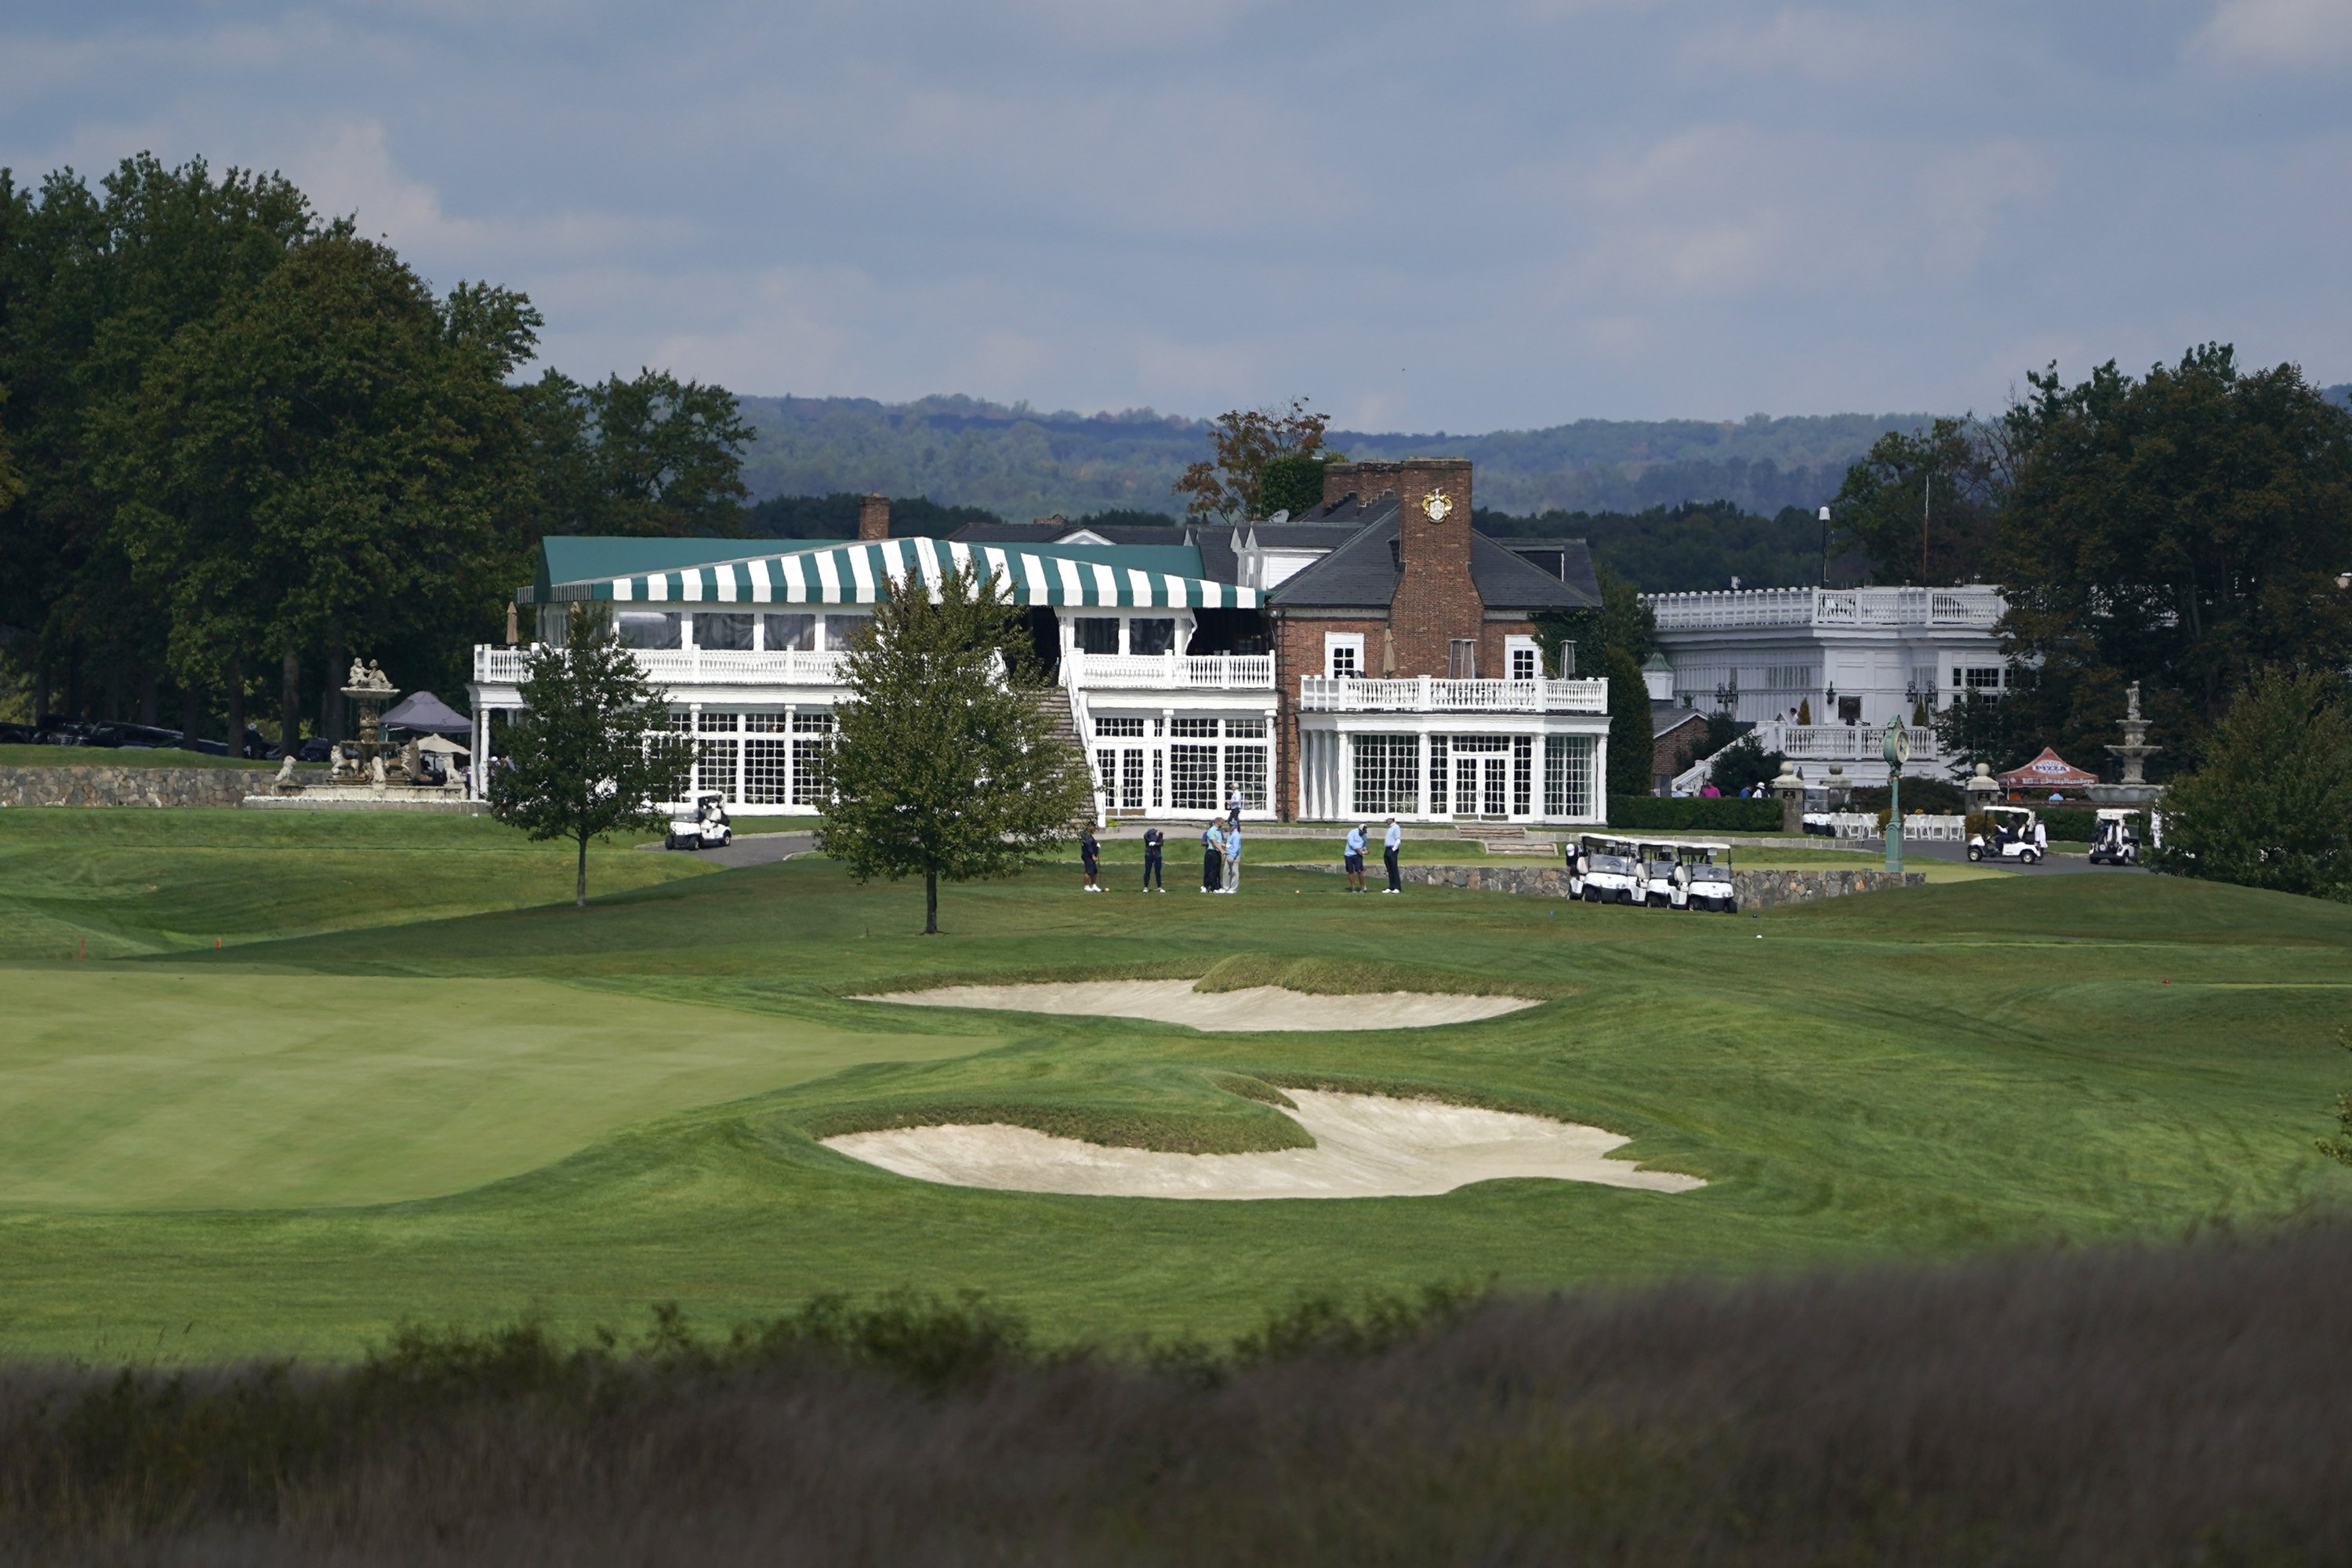 PGA Championship leaving Trump National in the 22nd tournament